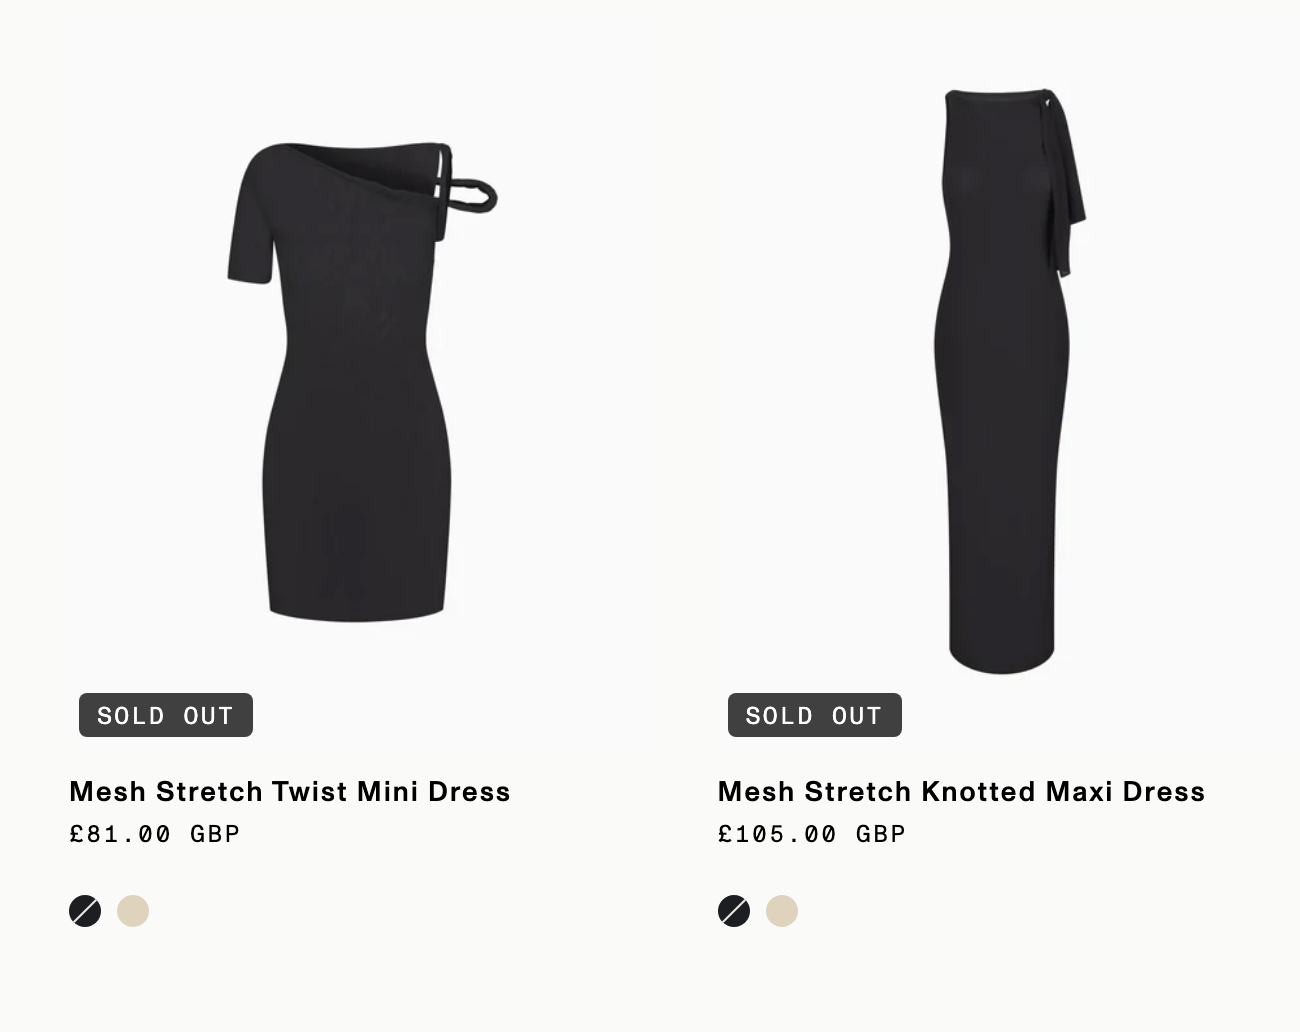 Two black dresses on display, one mini and one maxi, both currently sold out